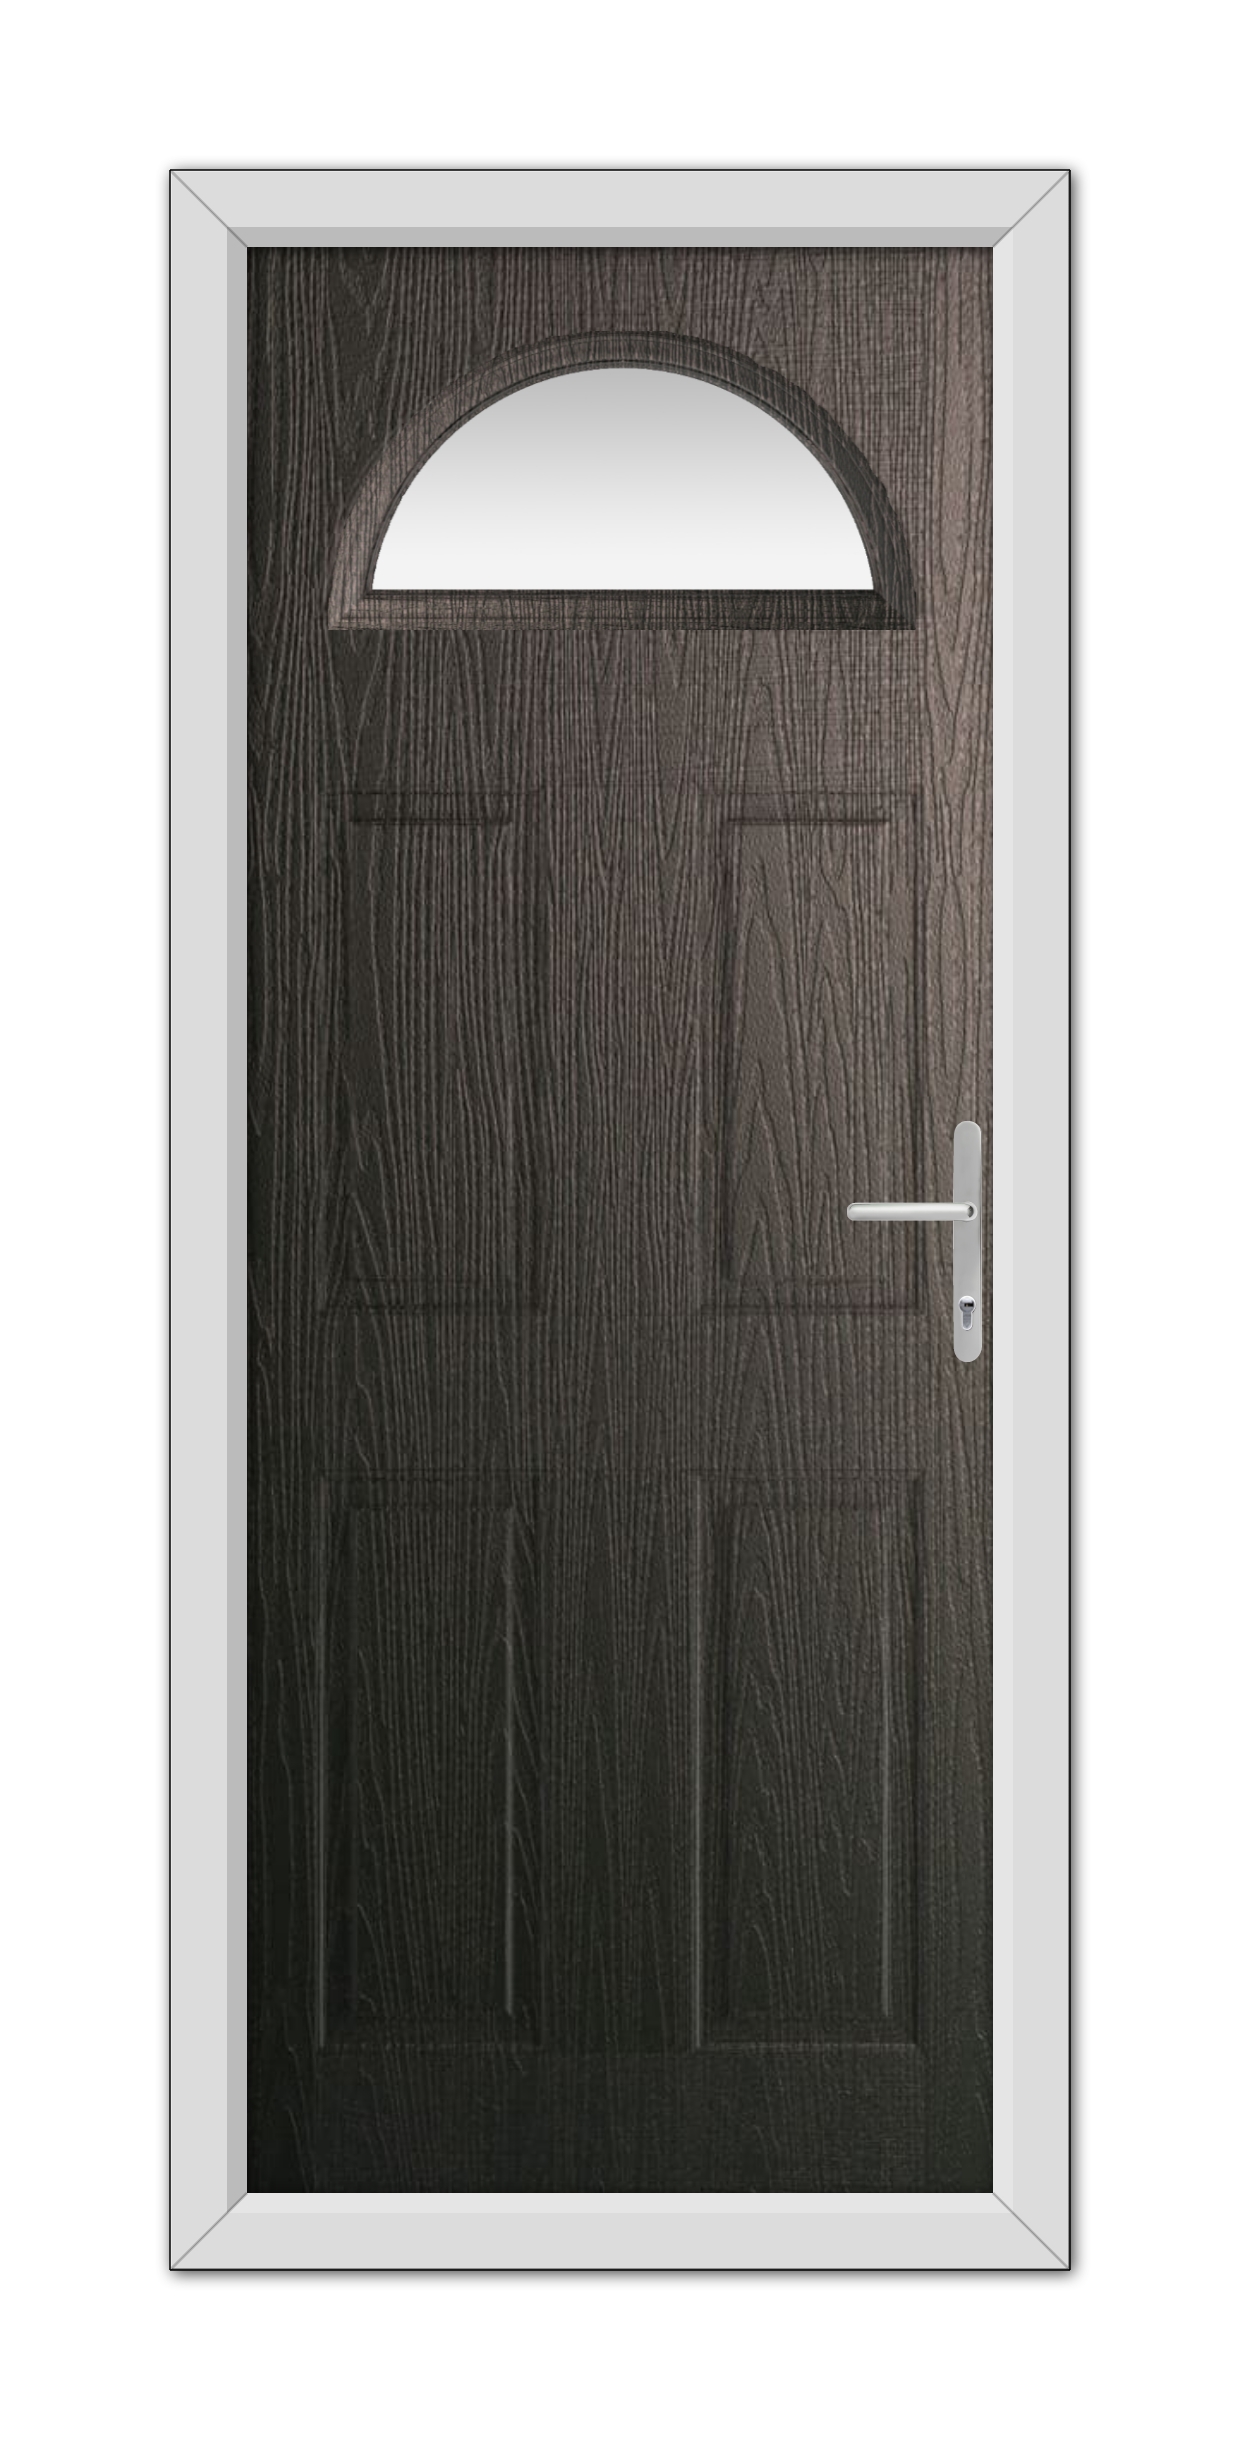 A modern Schwarzbraun Winslow 1 Composite Door 48mm Timber Core with a semi-circular window at the top, featuring a white handle and framed in a white door frame.